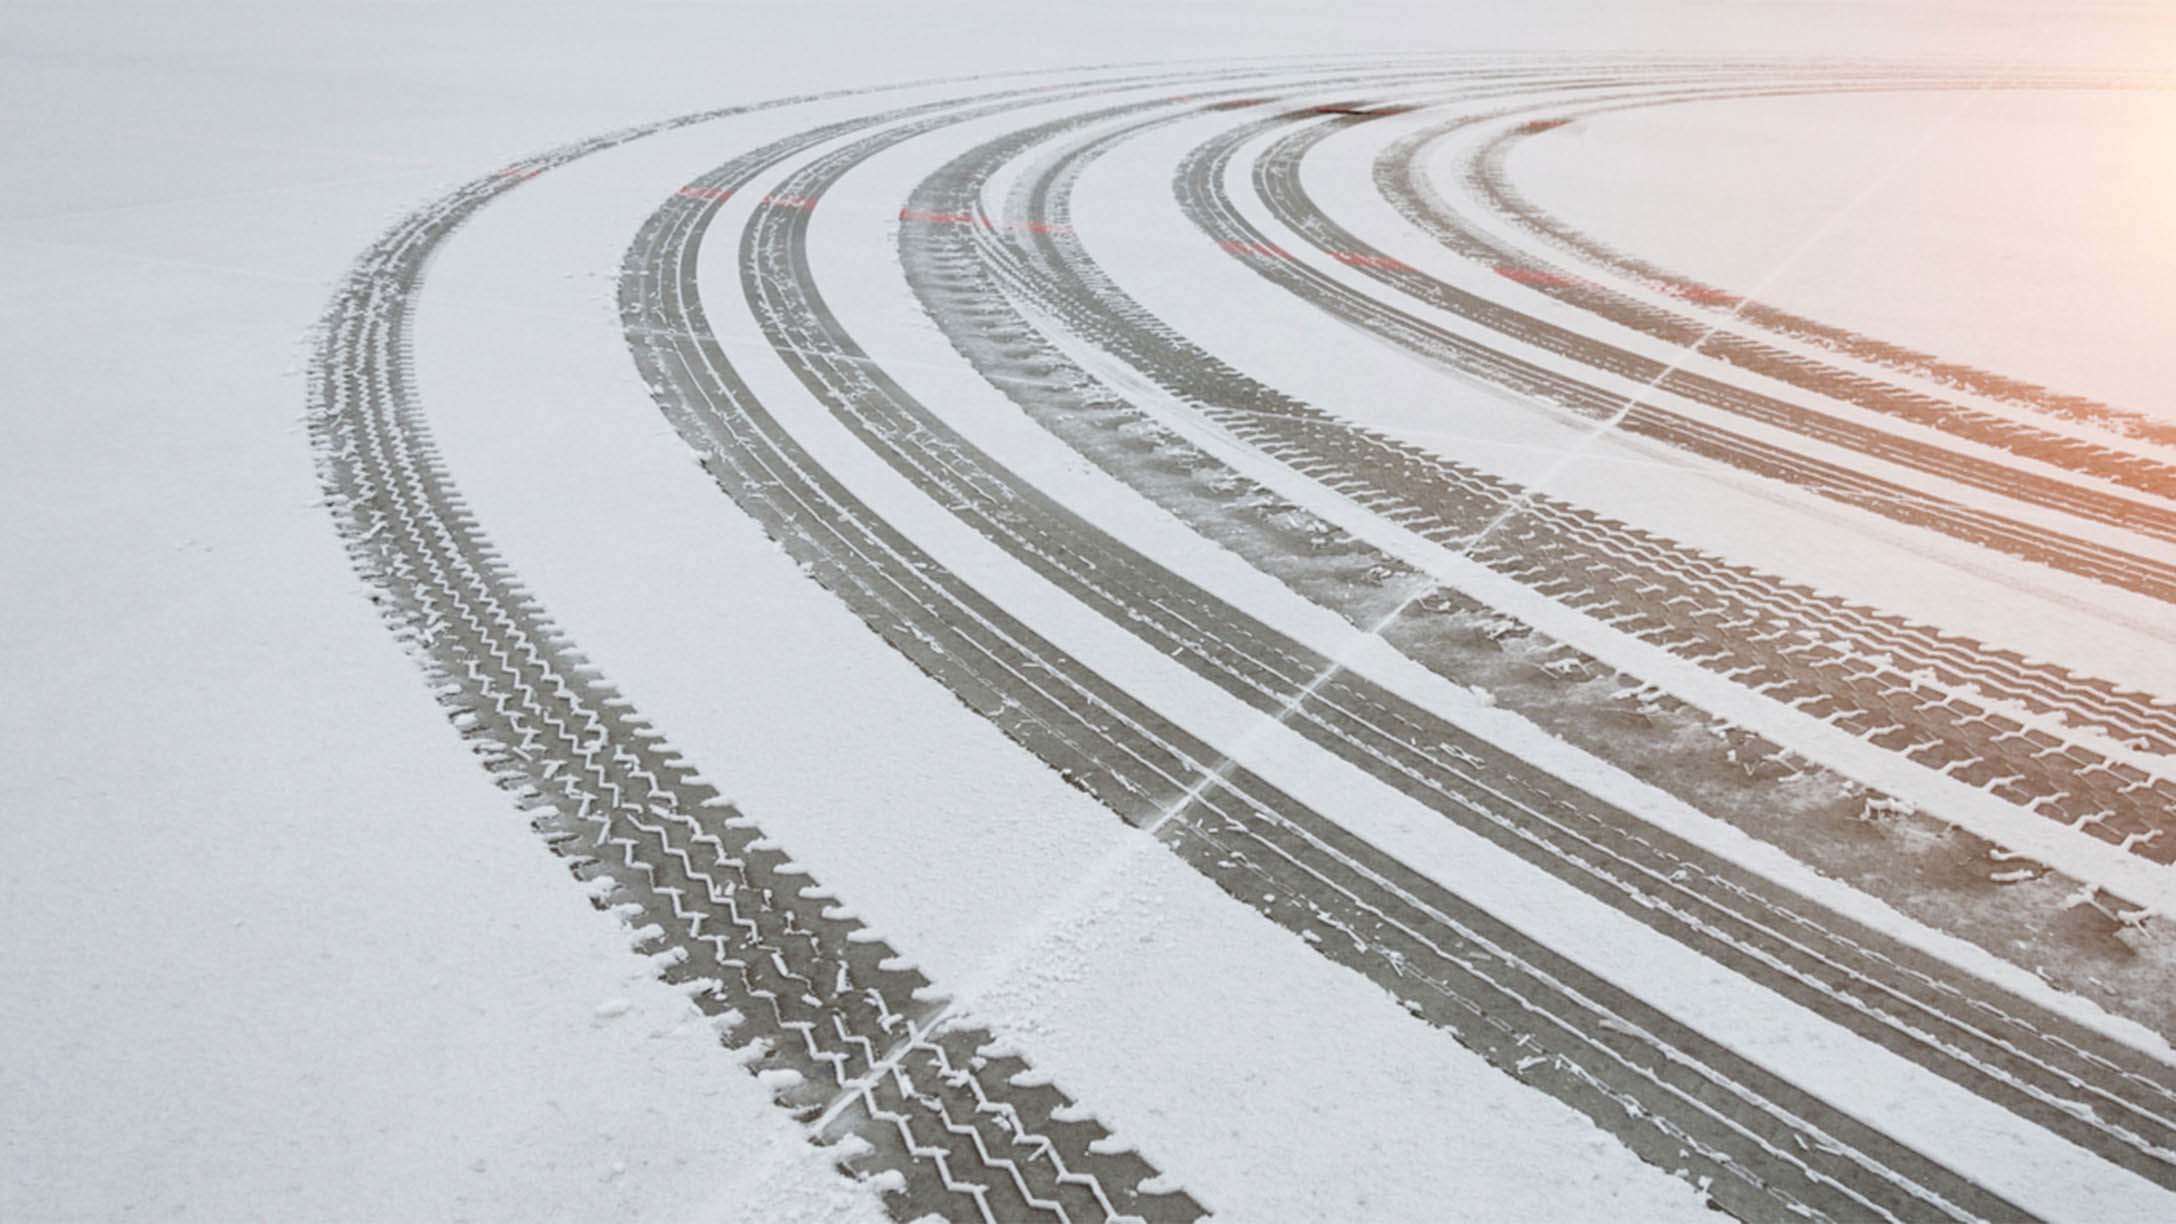 multiple sets of tire tracks in snow on a road